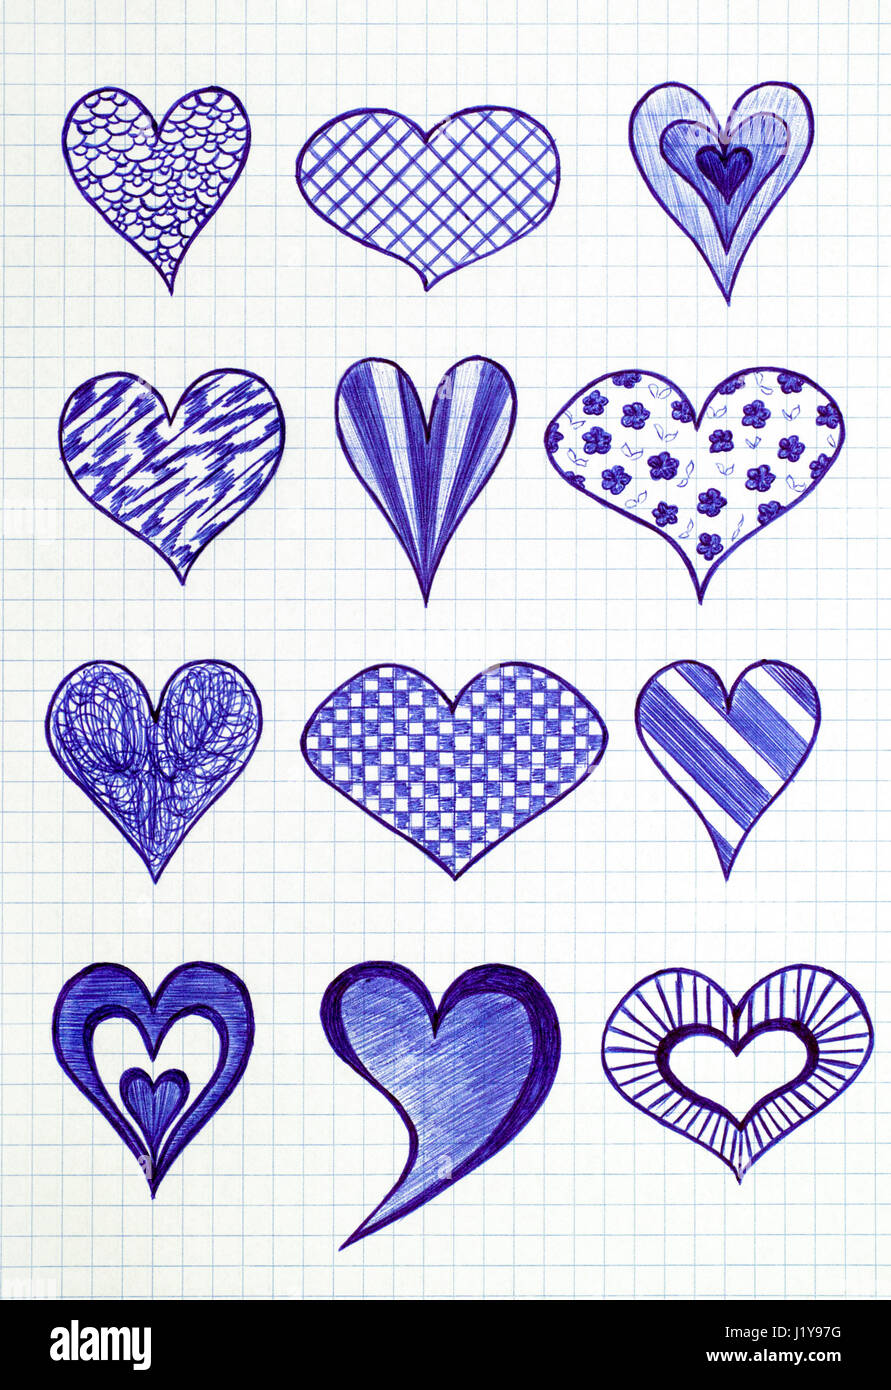 Twelve hand drawn heart shapes on the sheet of checkered paper. Doodle style. Stock Photo